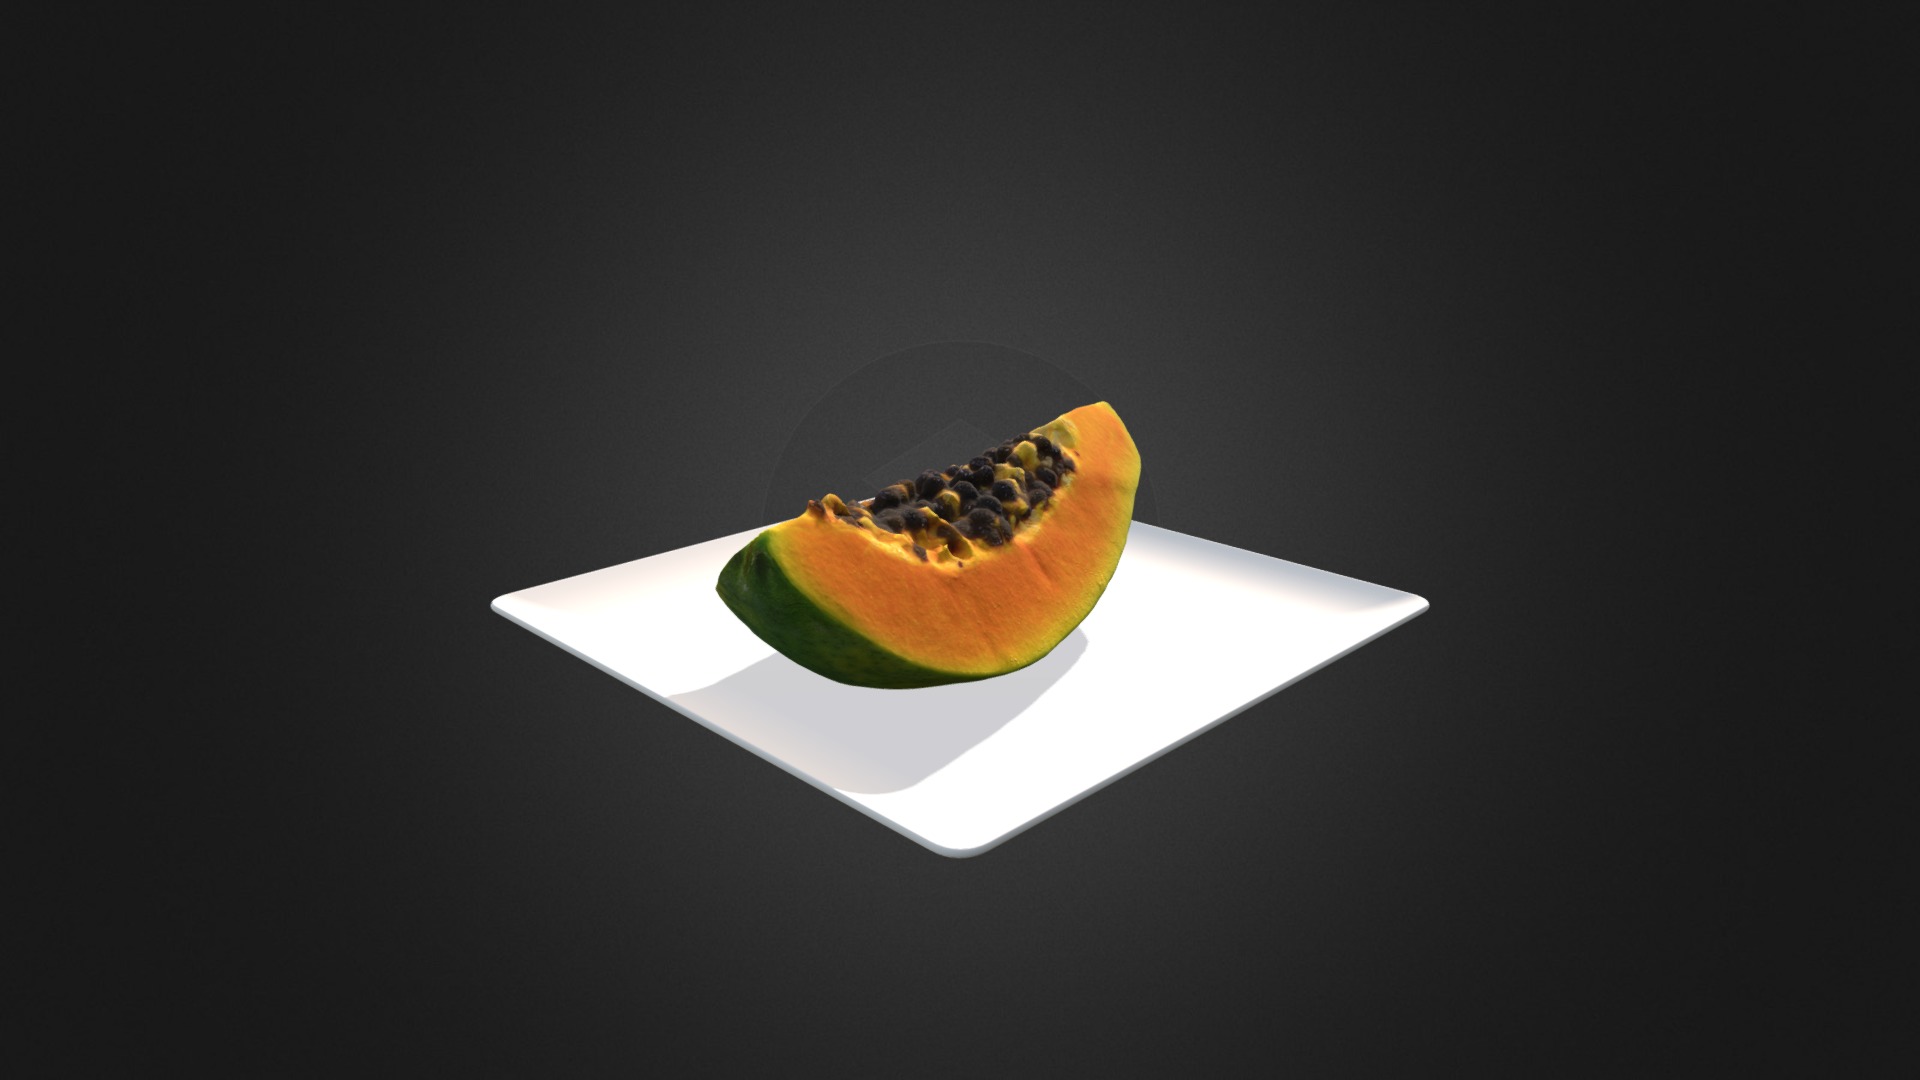 3D model Papaya Slice on White Plate - This is a 3D model of the Papaya Slice on White Plate. The 3D model is about a fruit on a plate.